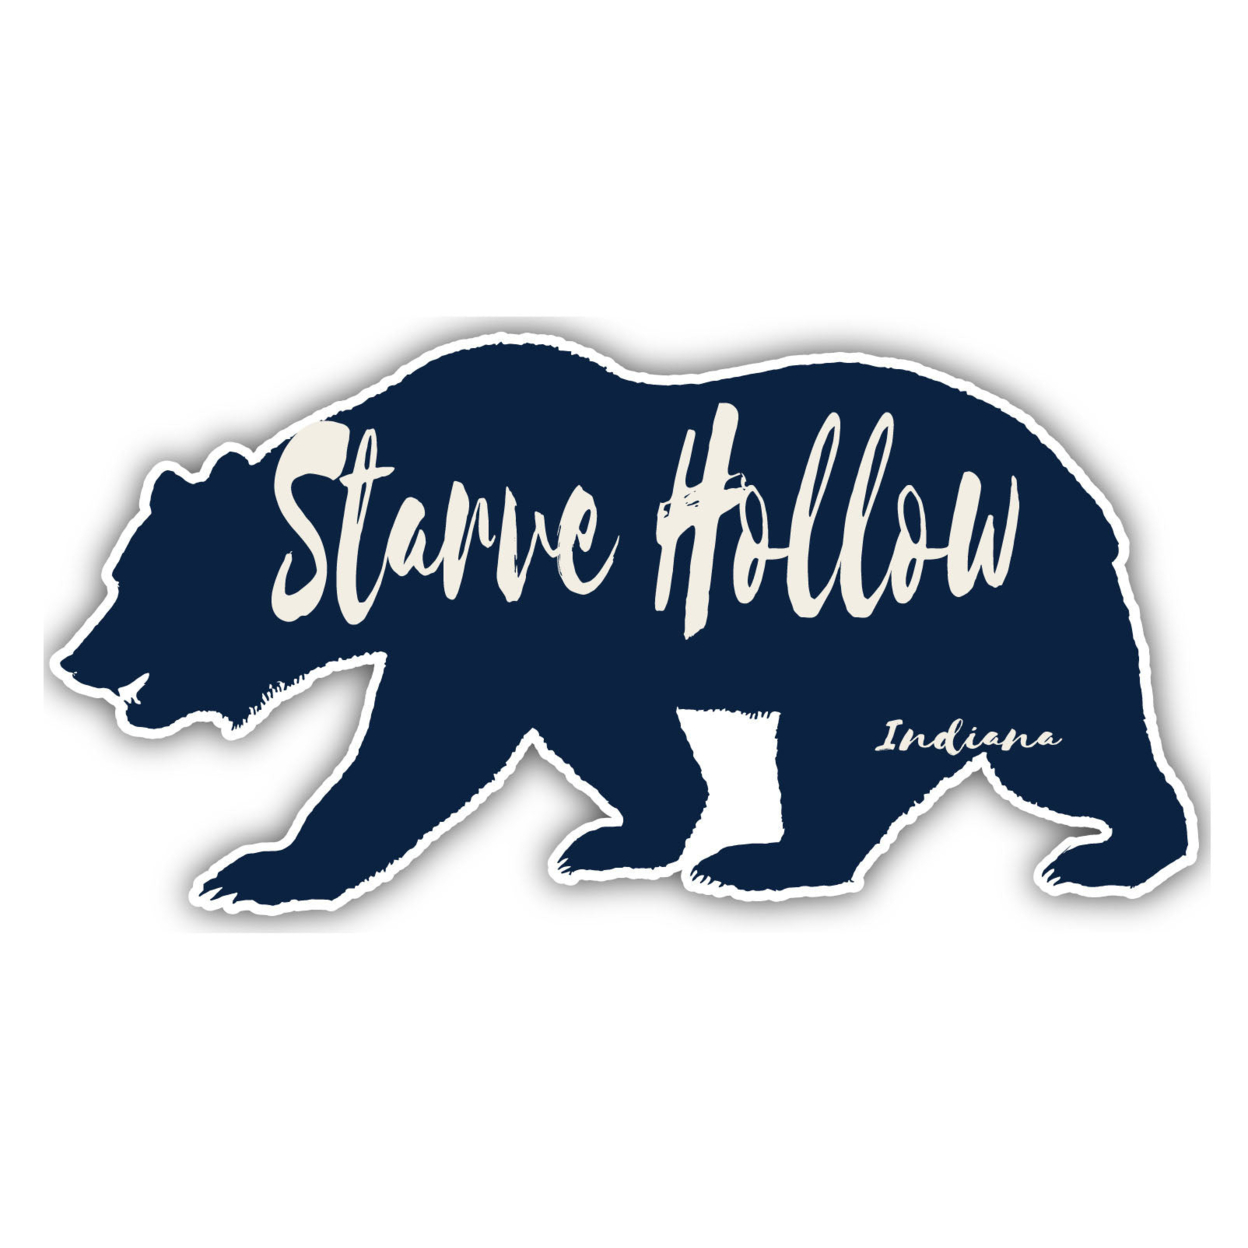 Starve Hollow Indiana Souvenir Decorative Stickers (Choose Theme And Size) - Single Unit, 4-Inch, Bear